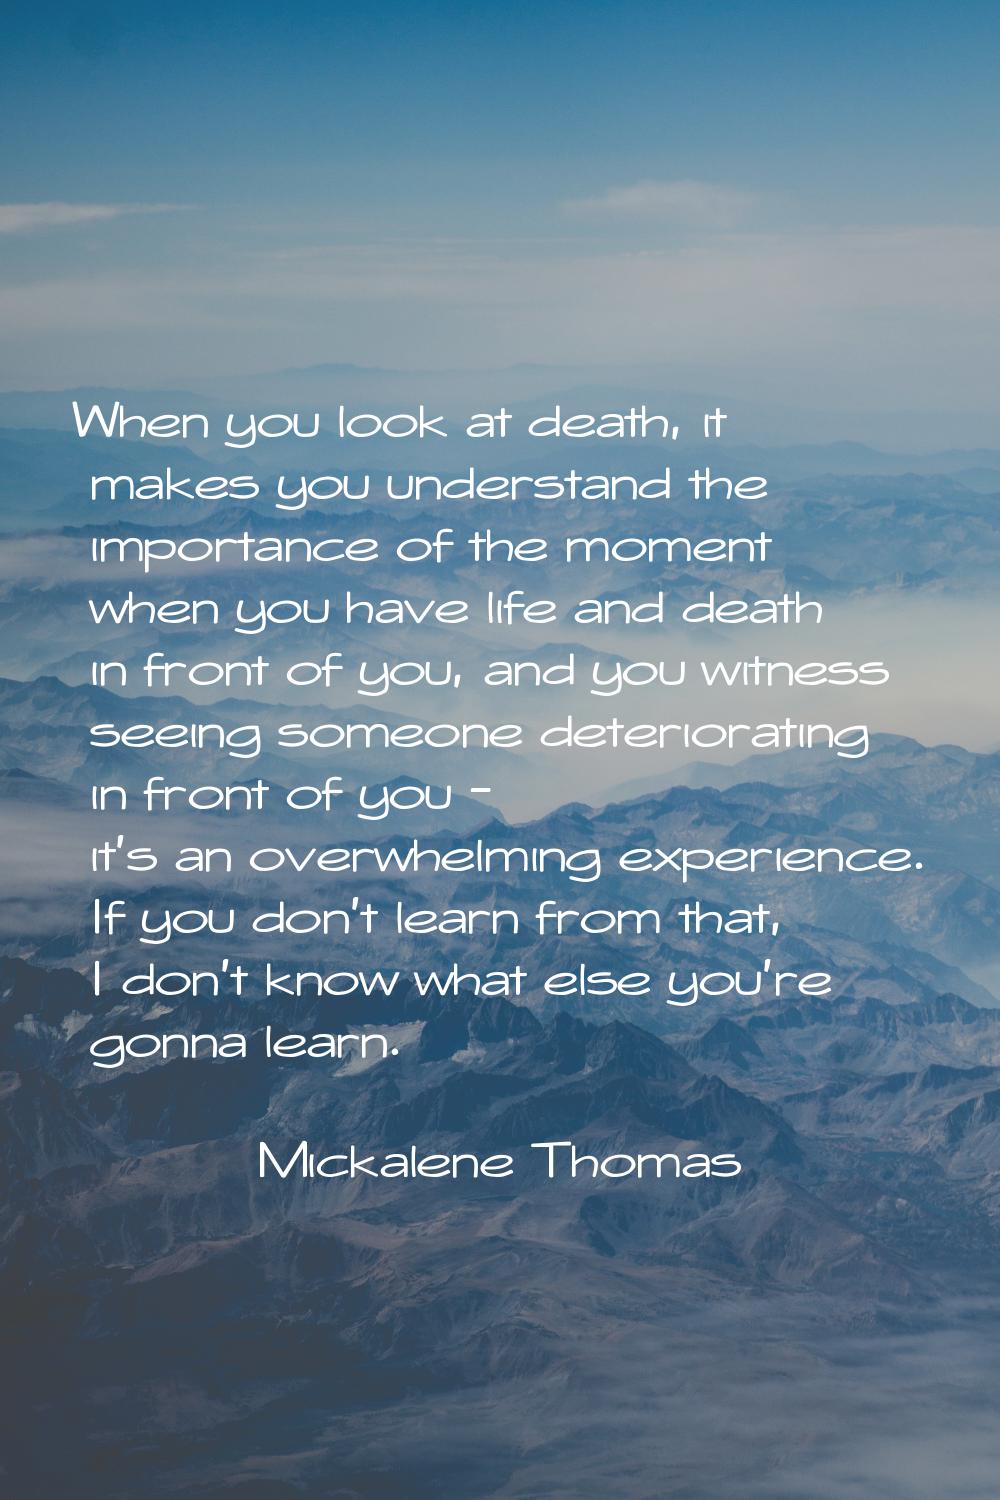 When you look at death, it makes you understand the importance of the moment when you have life and